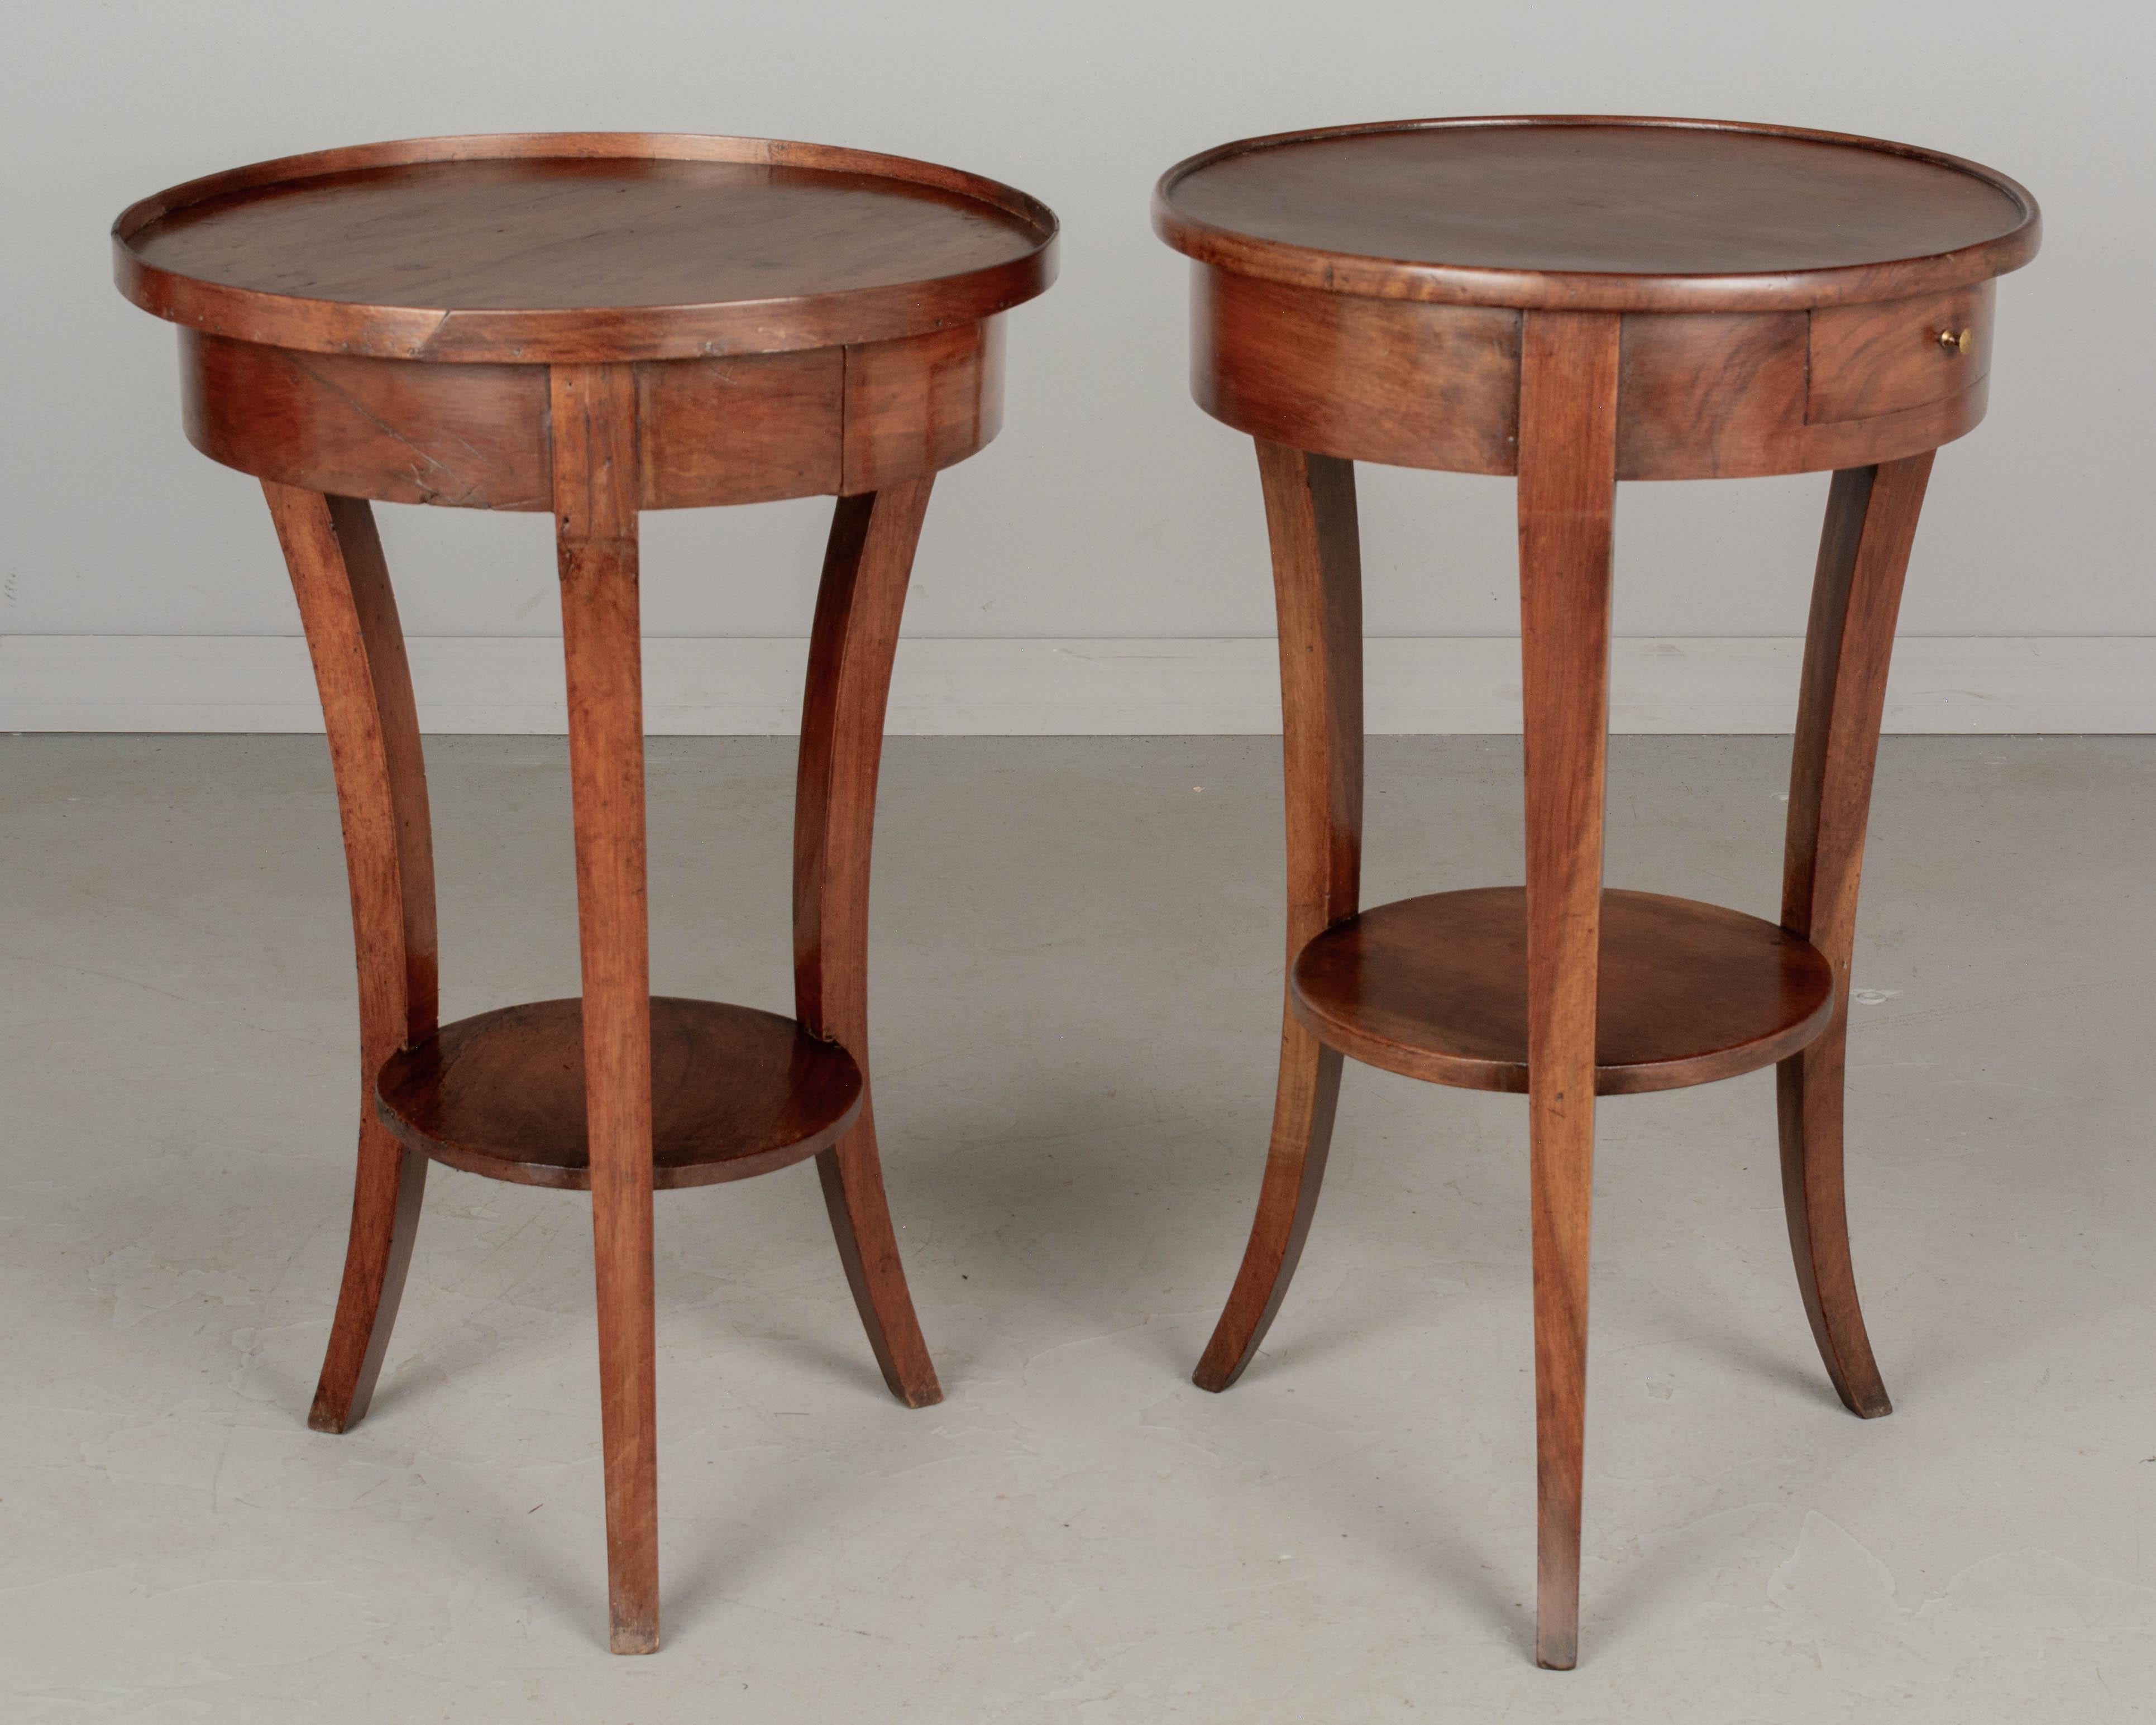 Hand-Crafted French Walnut Circular Side Tables, Set of 2 For Sale